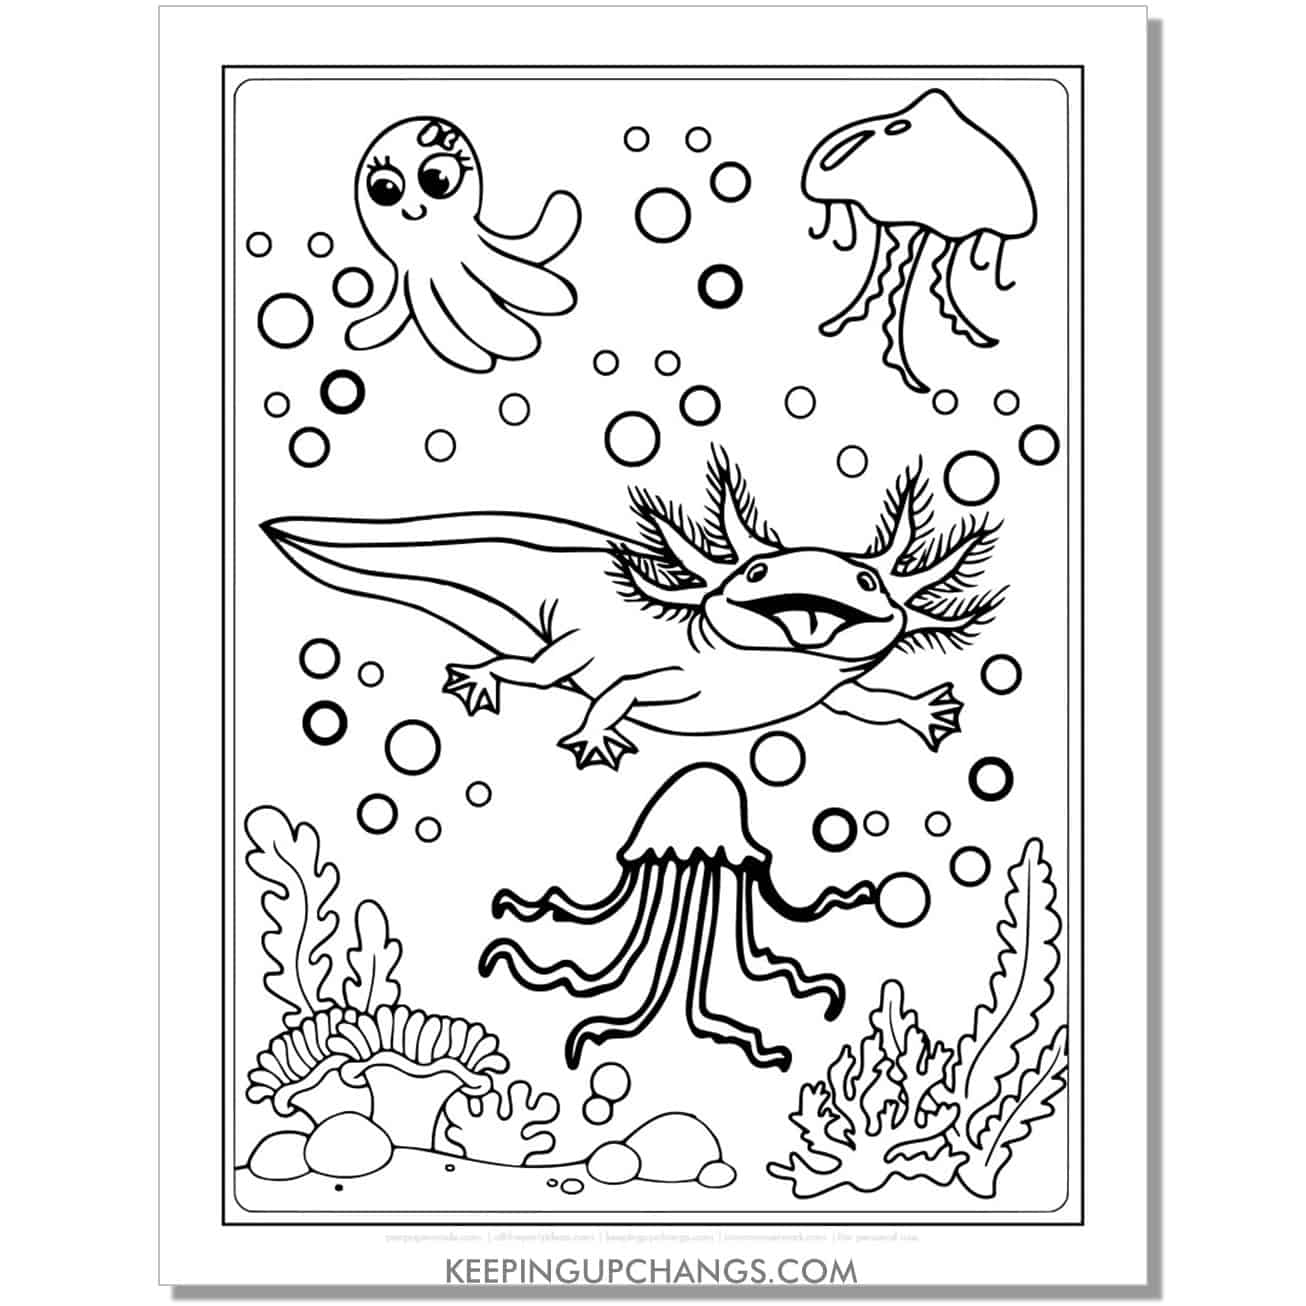 free funny axolotl coloring page with tongue sticking out.